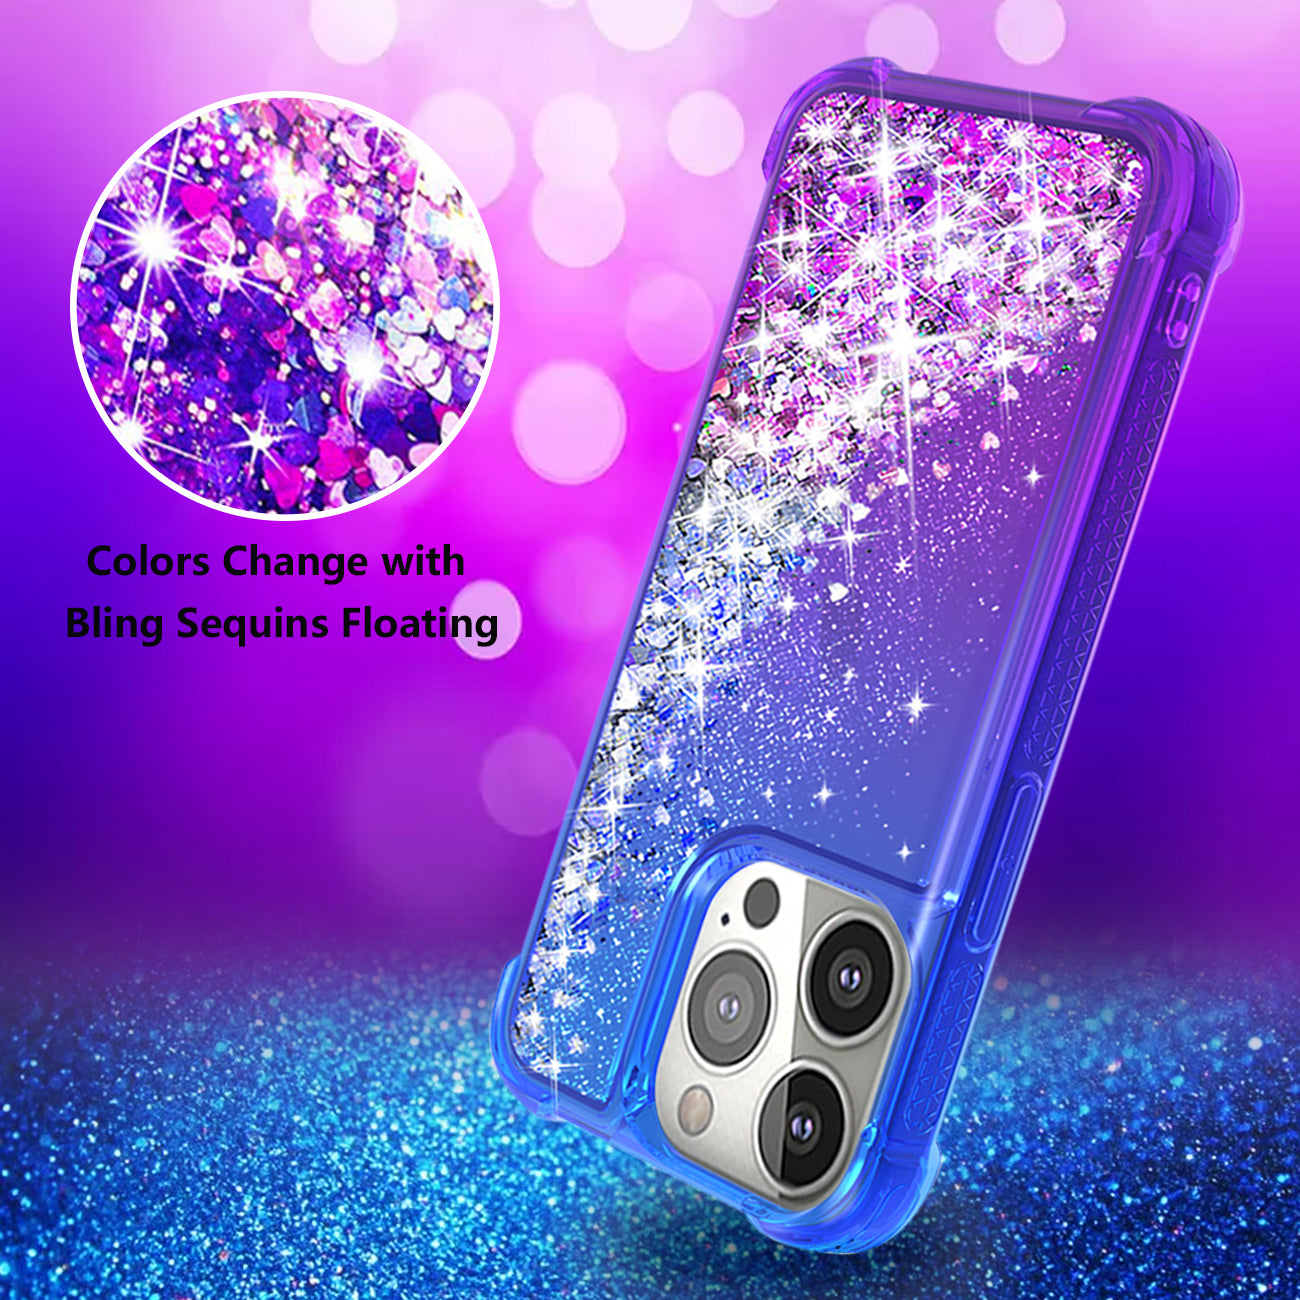 Shiny Flowing Glitter Liquid Bumper Case For APPLE IPHONE 13 PRO MAX In Blue